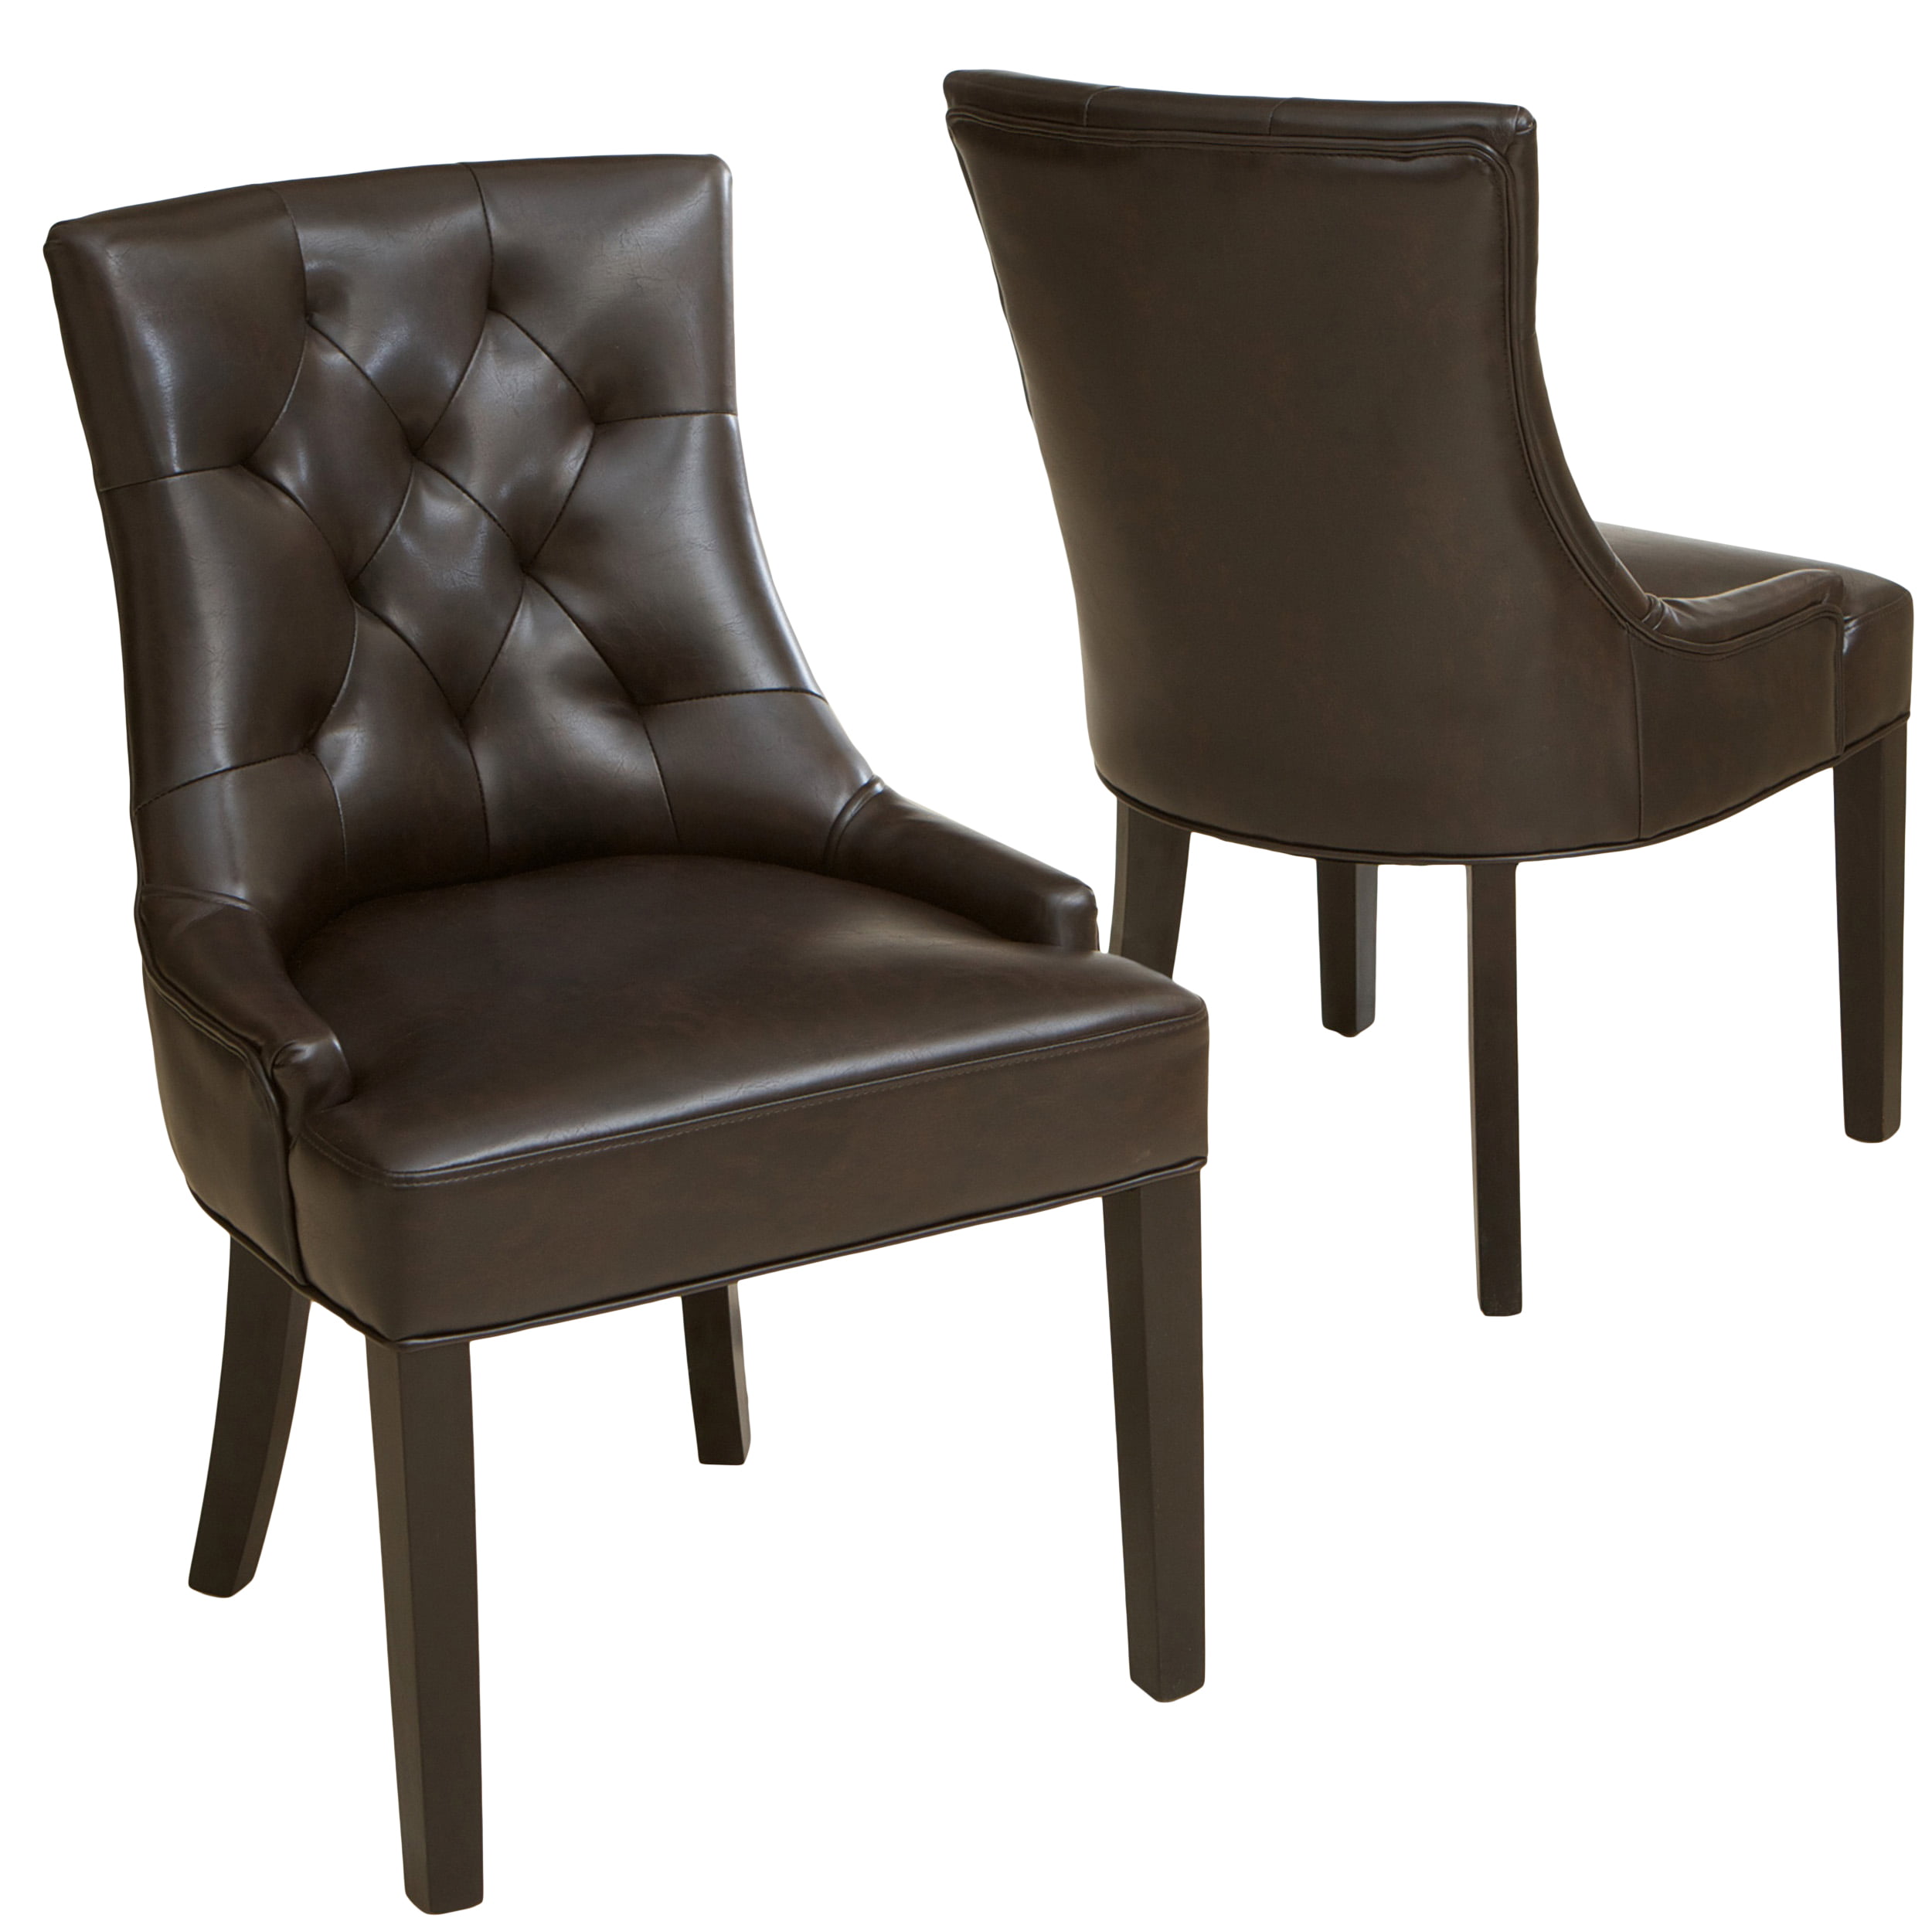 Noble House Hatch Tufted Brown Leather, Brown Leather Dining Room Chairs With Arms